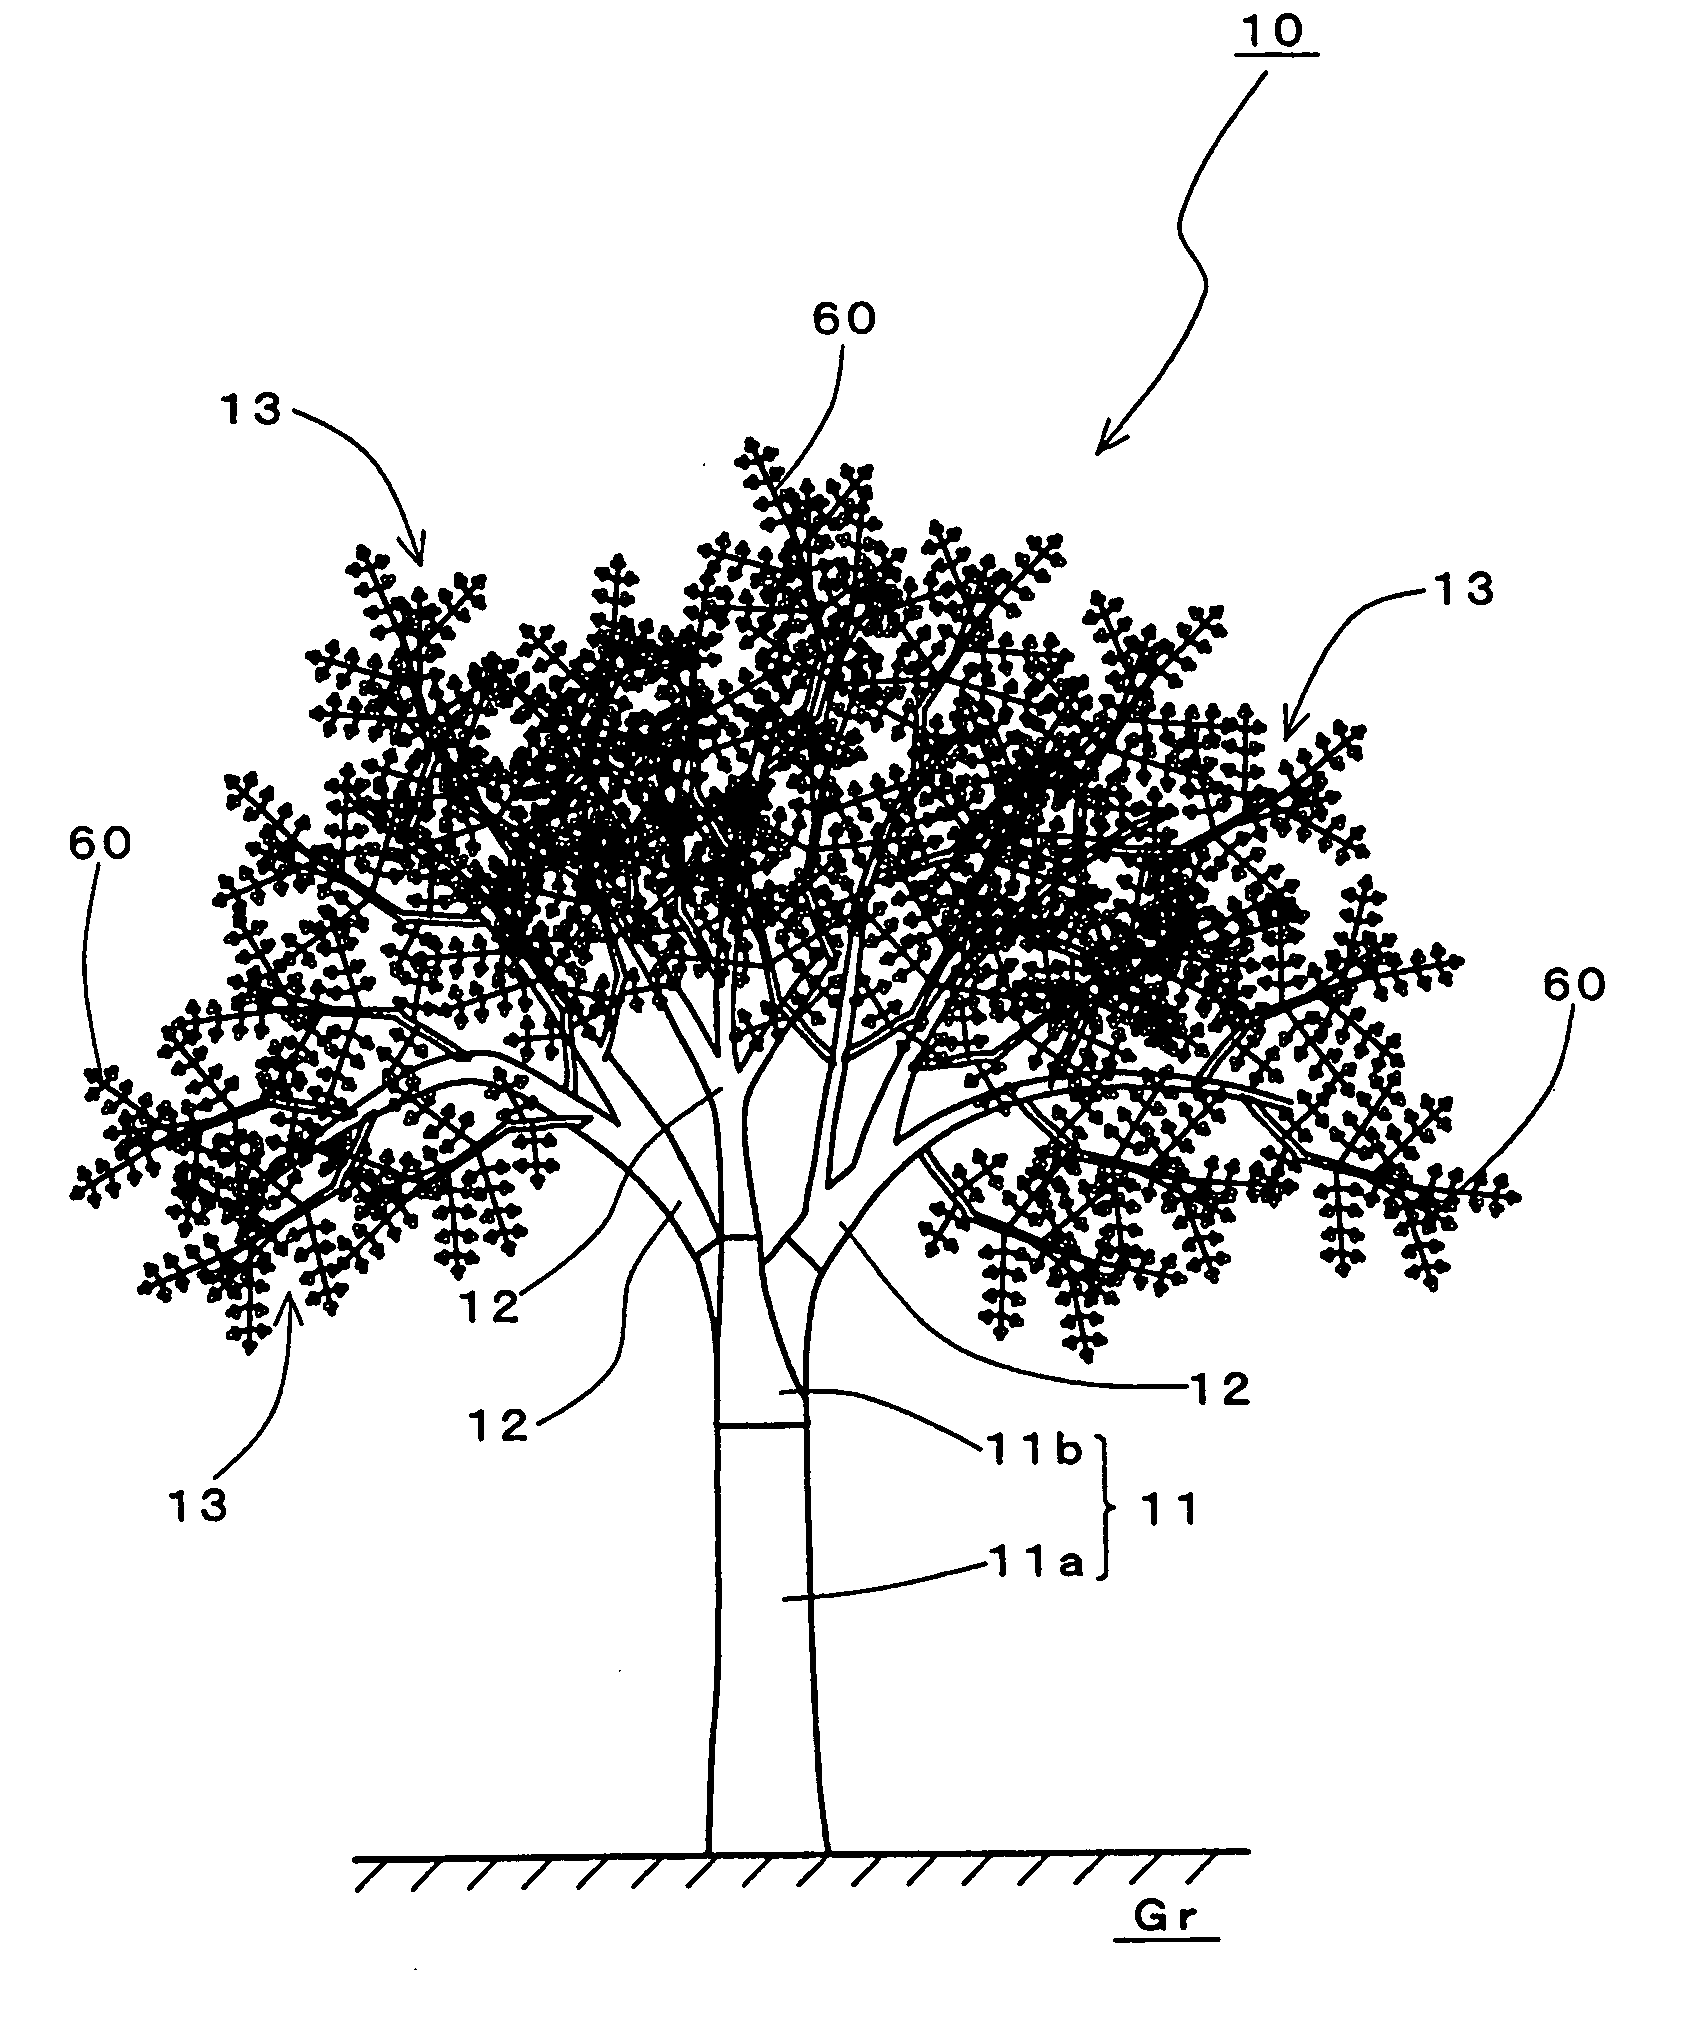 Electrical tree structure